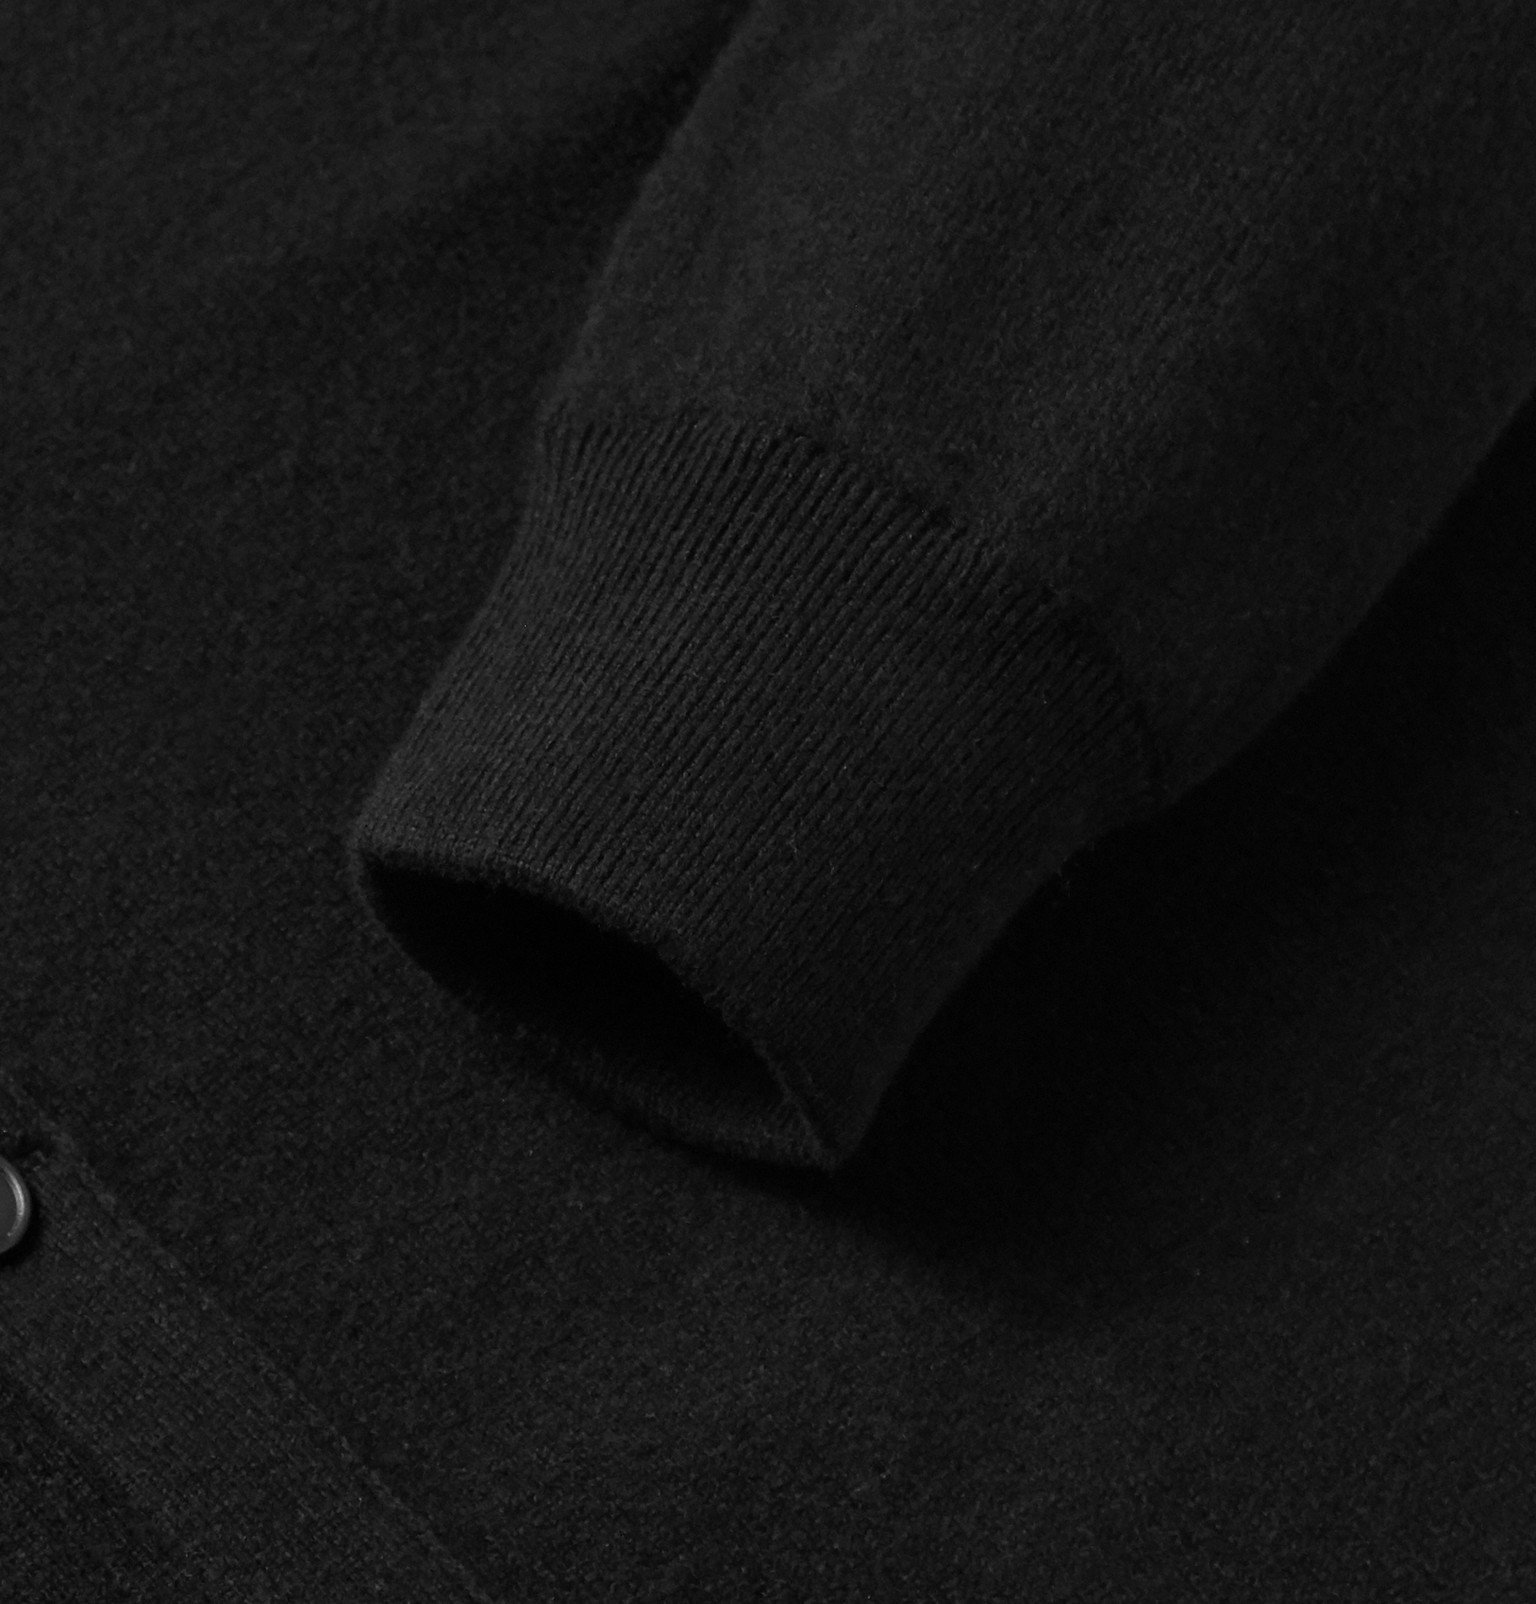 The Row - Wes Cashmere Cardigan - Black The Row